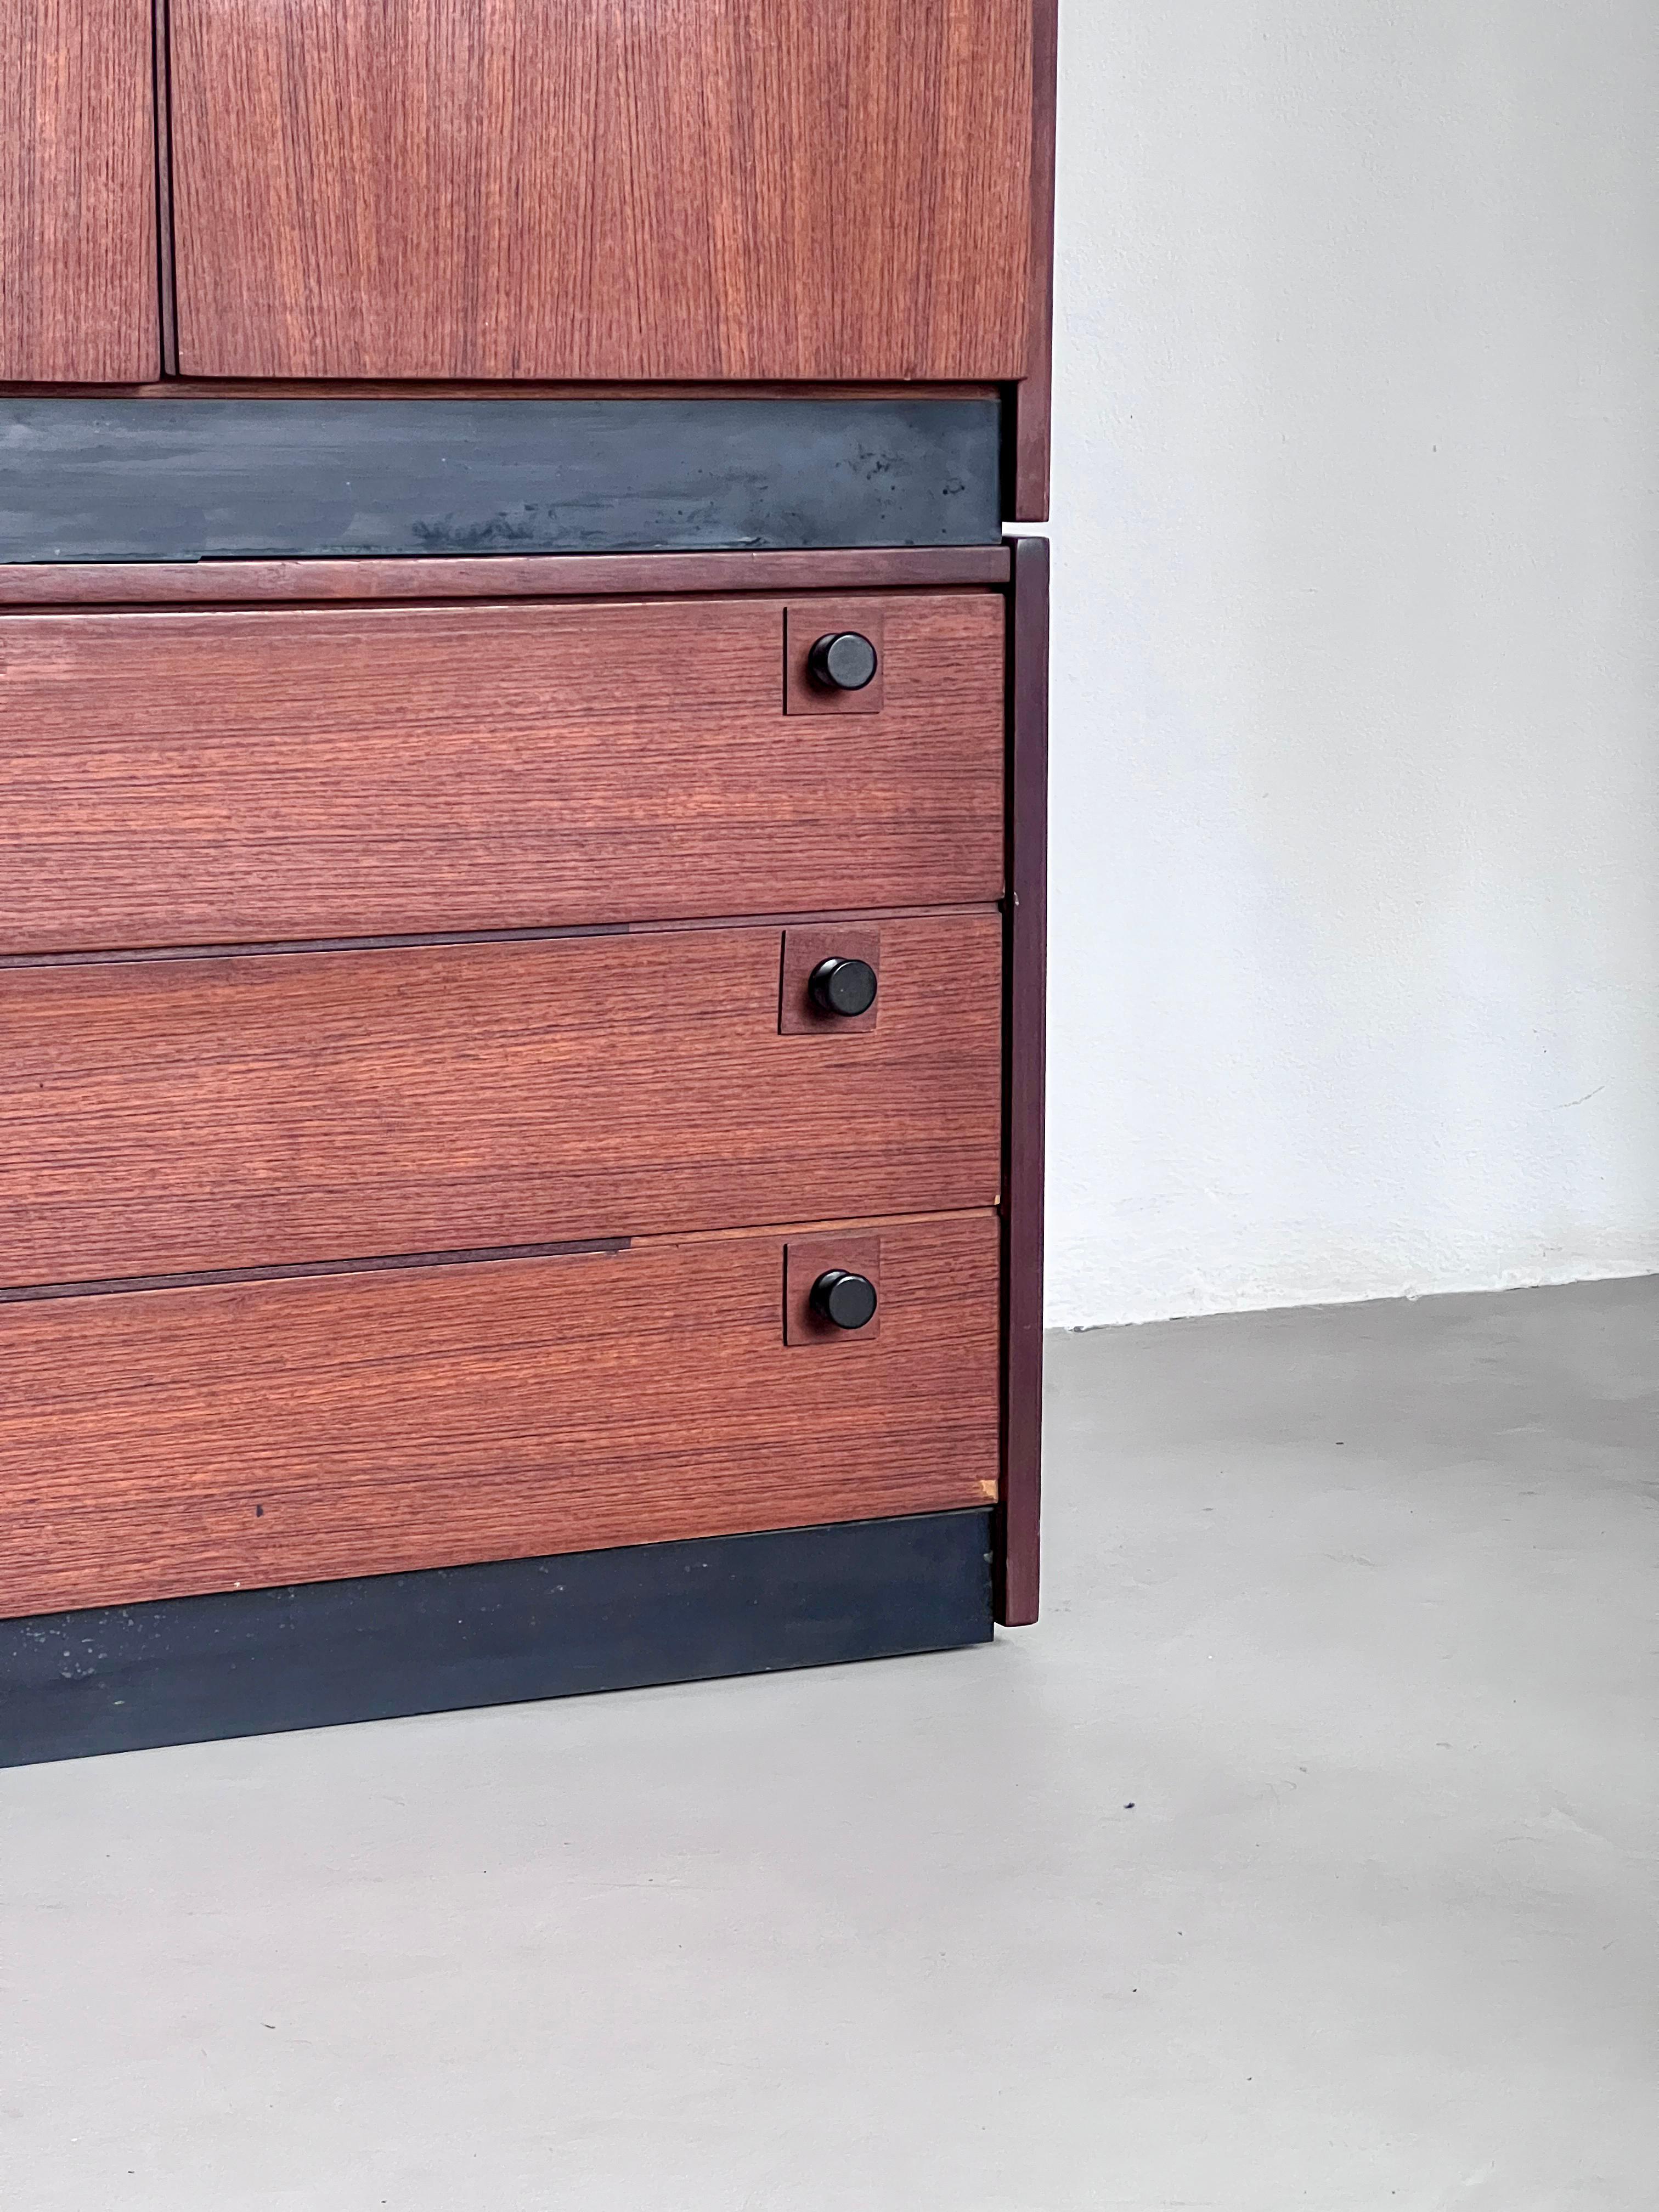 Very nice, vintage Mid-Century Modern modular wardrobe in walnut with elegant and refined black details (hinges, knobs, base). It can be assembled with either the drawers at the bottom or on top, and the two elements can also be separated.

Spacious